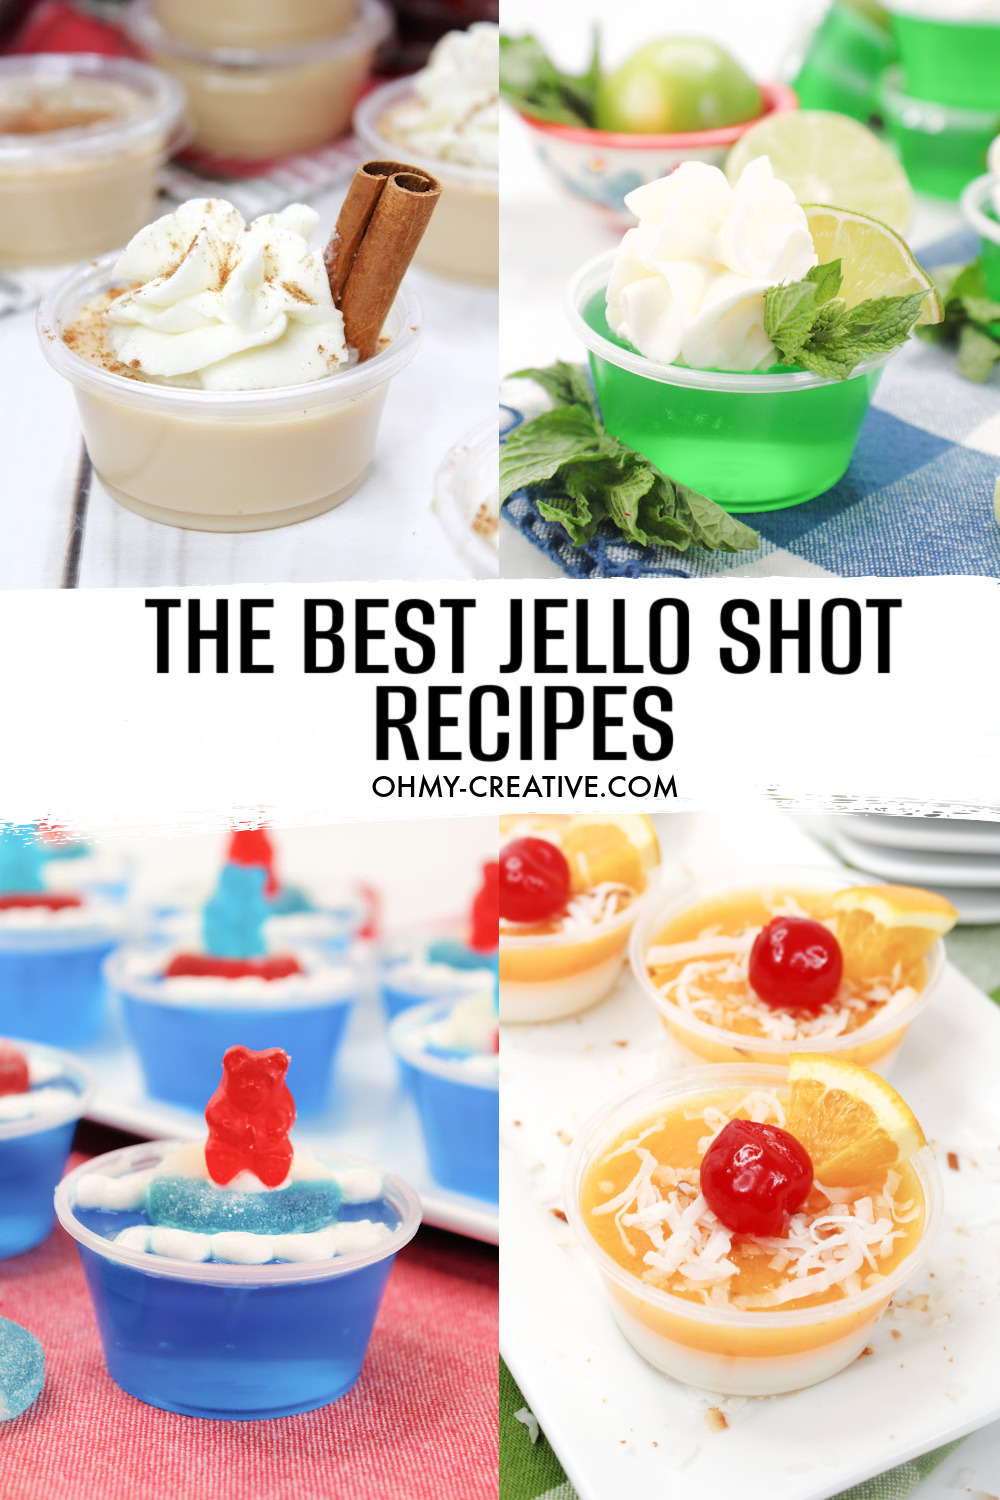 A collage of the best jello shot recipes including beach jello shots, pina colada jello shots, mojito jello shots, eggnog jello shots.